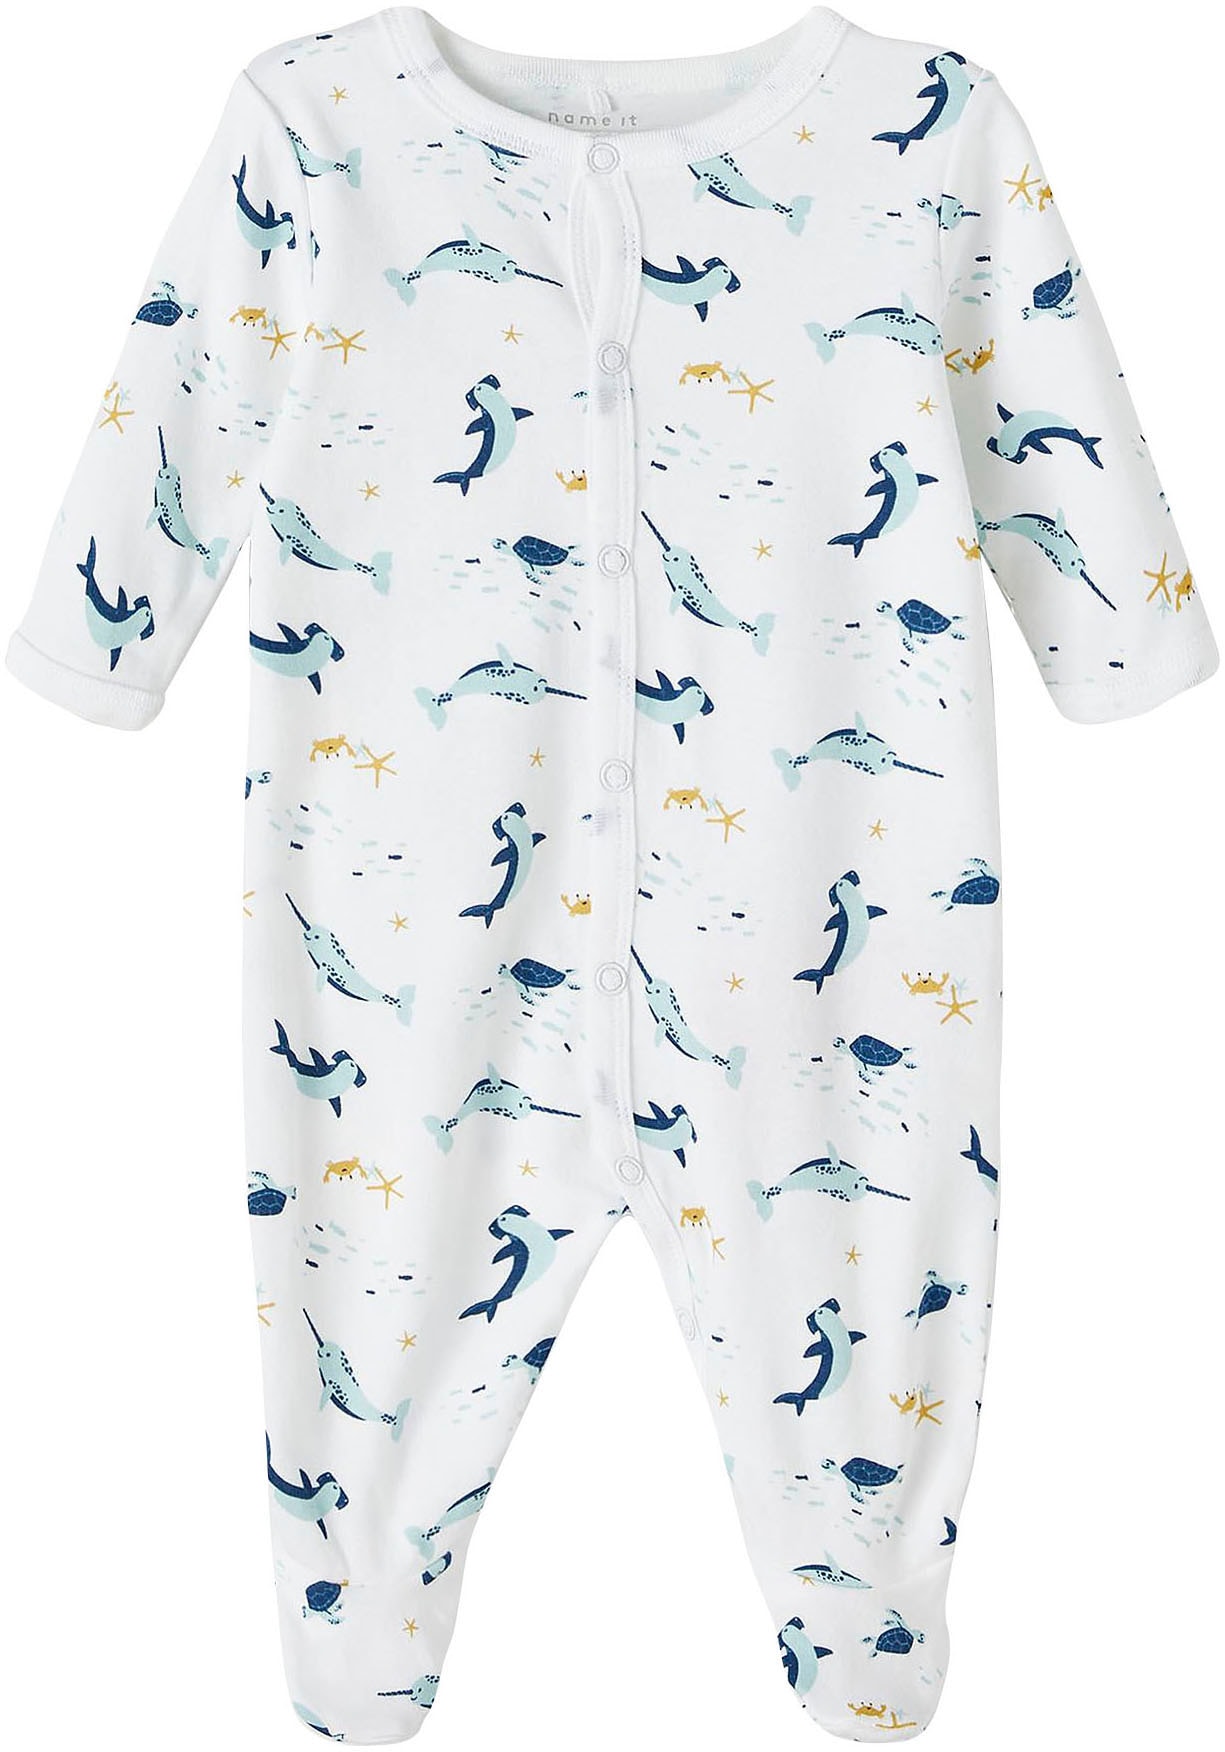 UNIVERSAL NOOS«, »NBMNIGHTSUIT UNDERSEA tlg.) 2P Schlafoverall | W/F (Packung, 2 online It kaufen Name